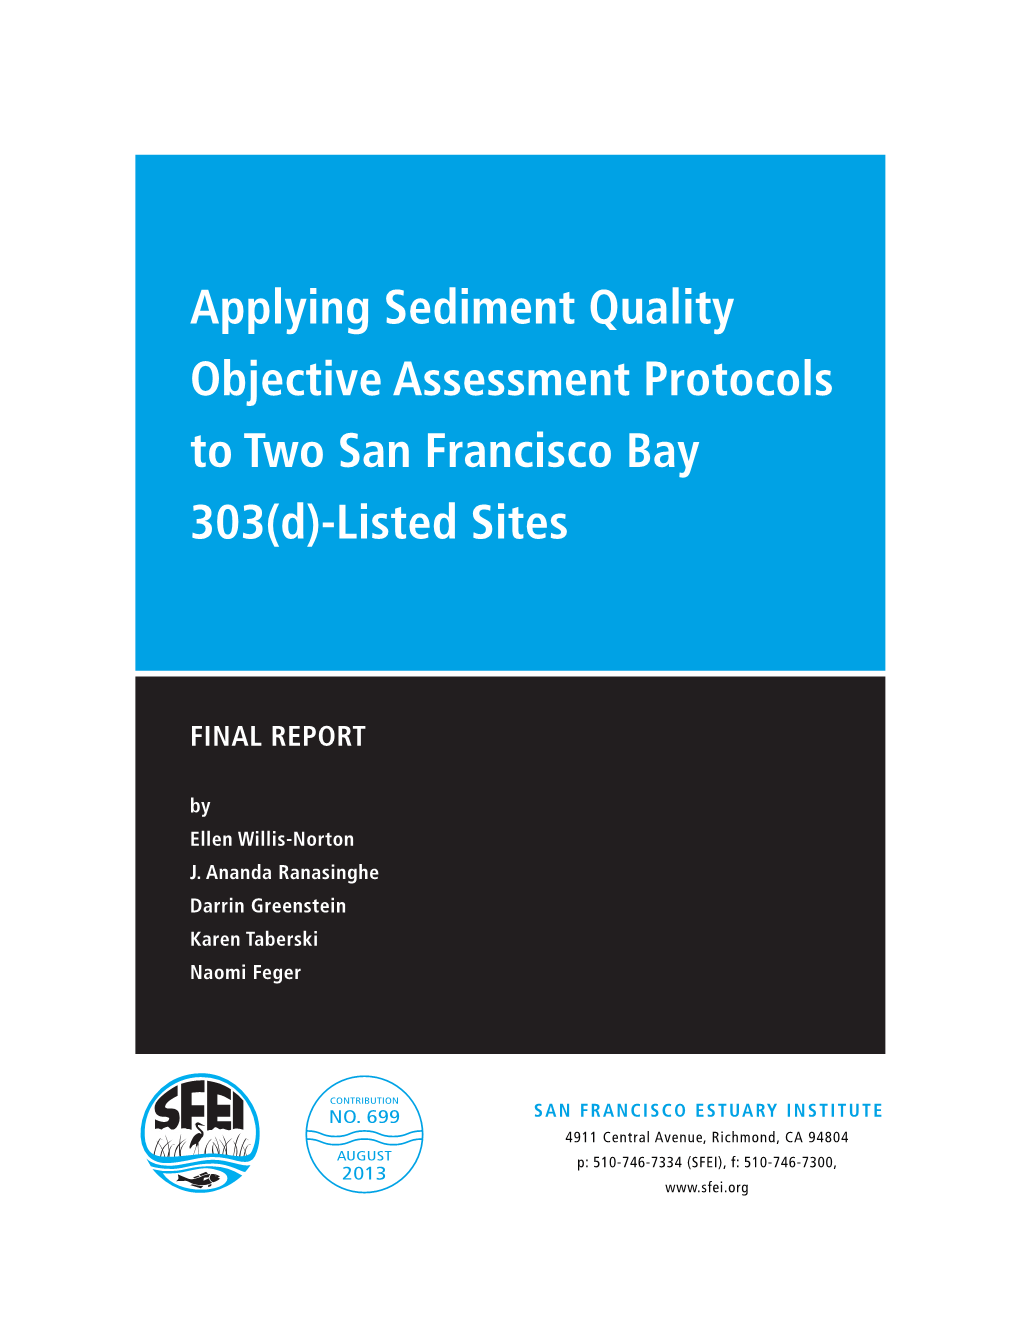 Applying Sediment Quality Objective Assessment Protocols to Two San Francisco Bay 303(D)-Listed Sites